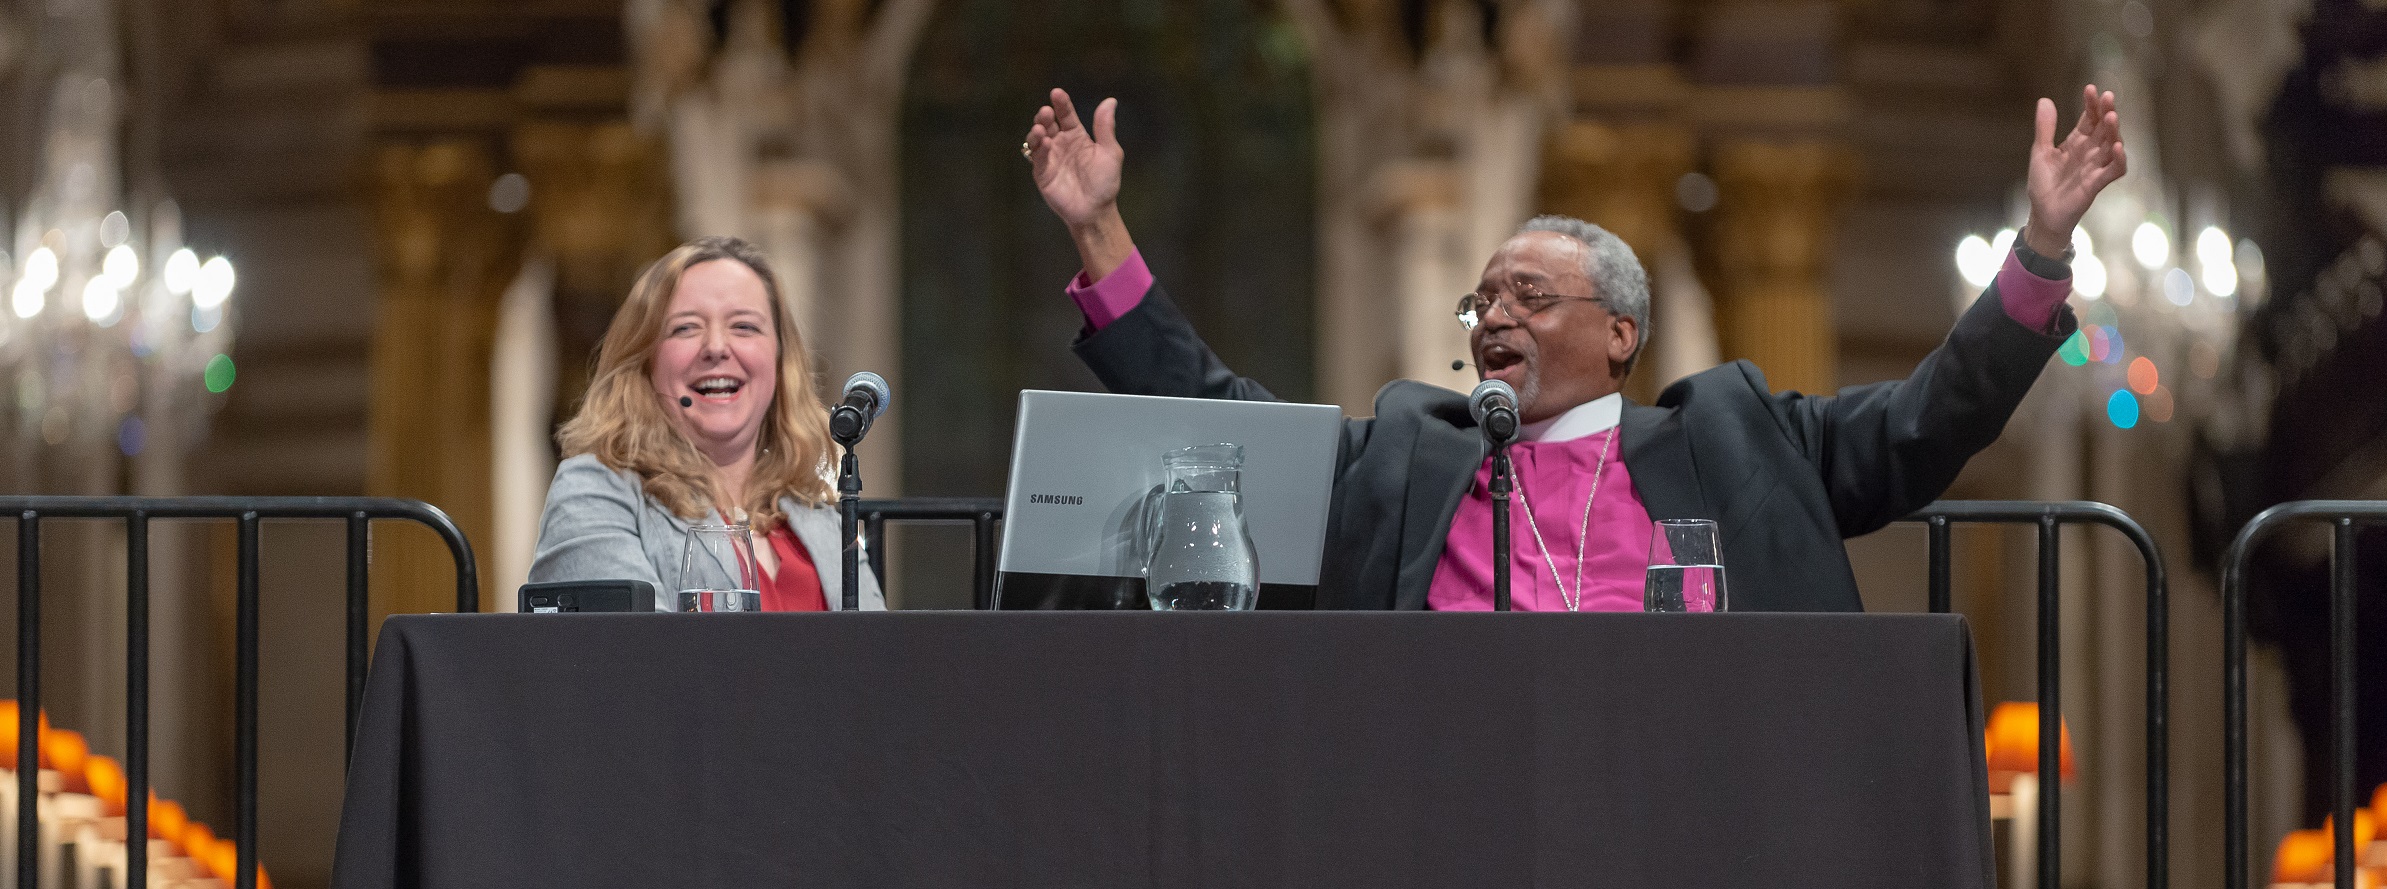 Bishop Curry, a black man with grey hair in a clerical collar purple shirt, on stage under the dome of the cathedral, smiling and arms outstretched, alongside a smiling Paula Gooder, a white woman with long blond hair in a grey jacket and red blouse.